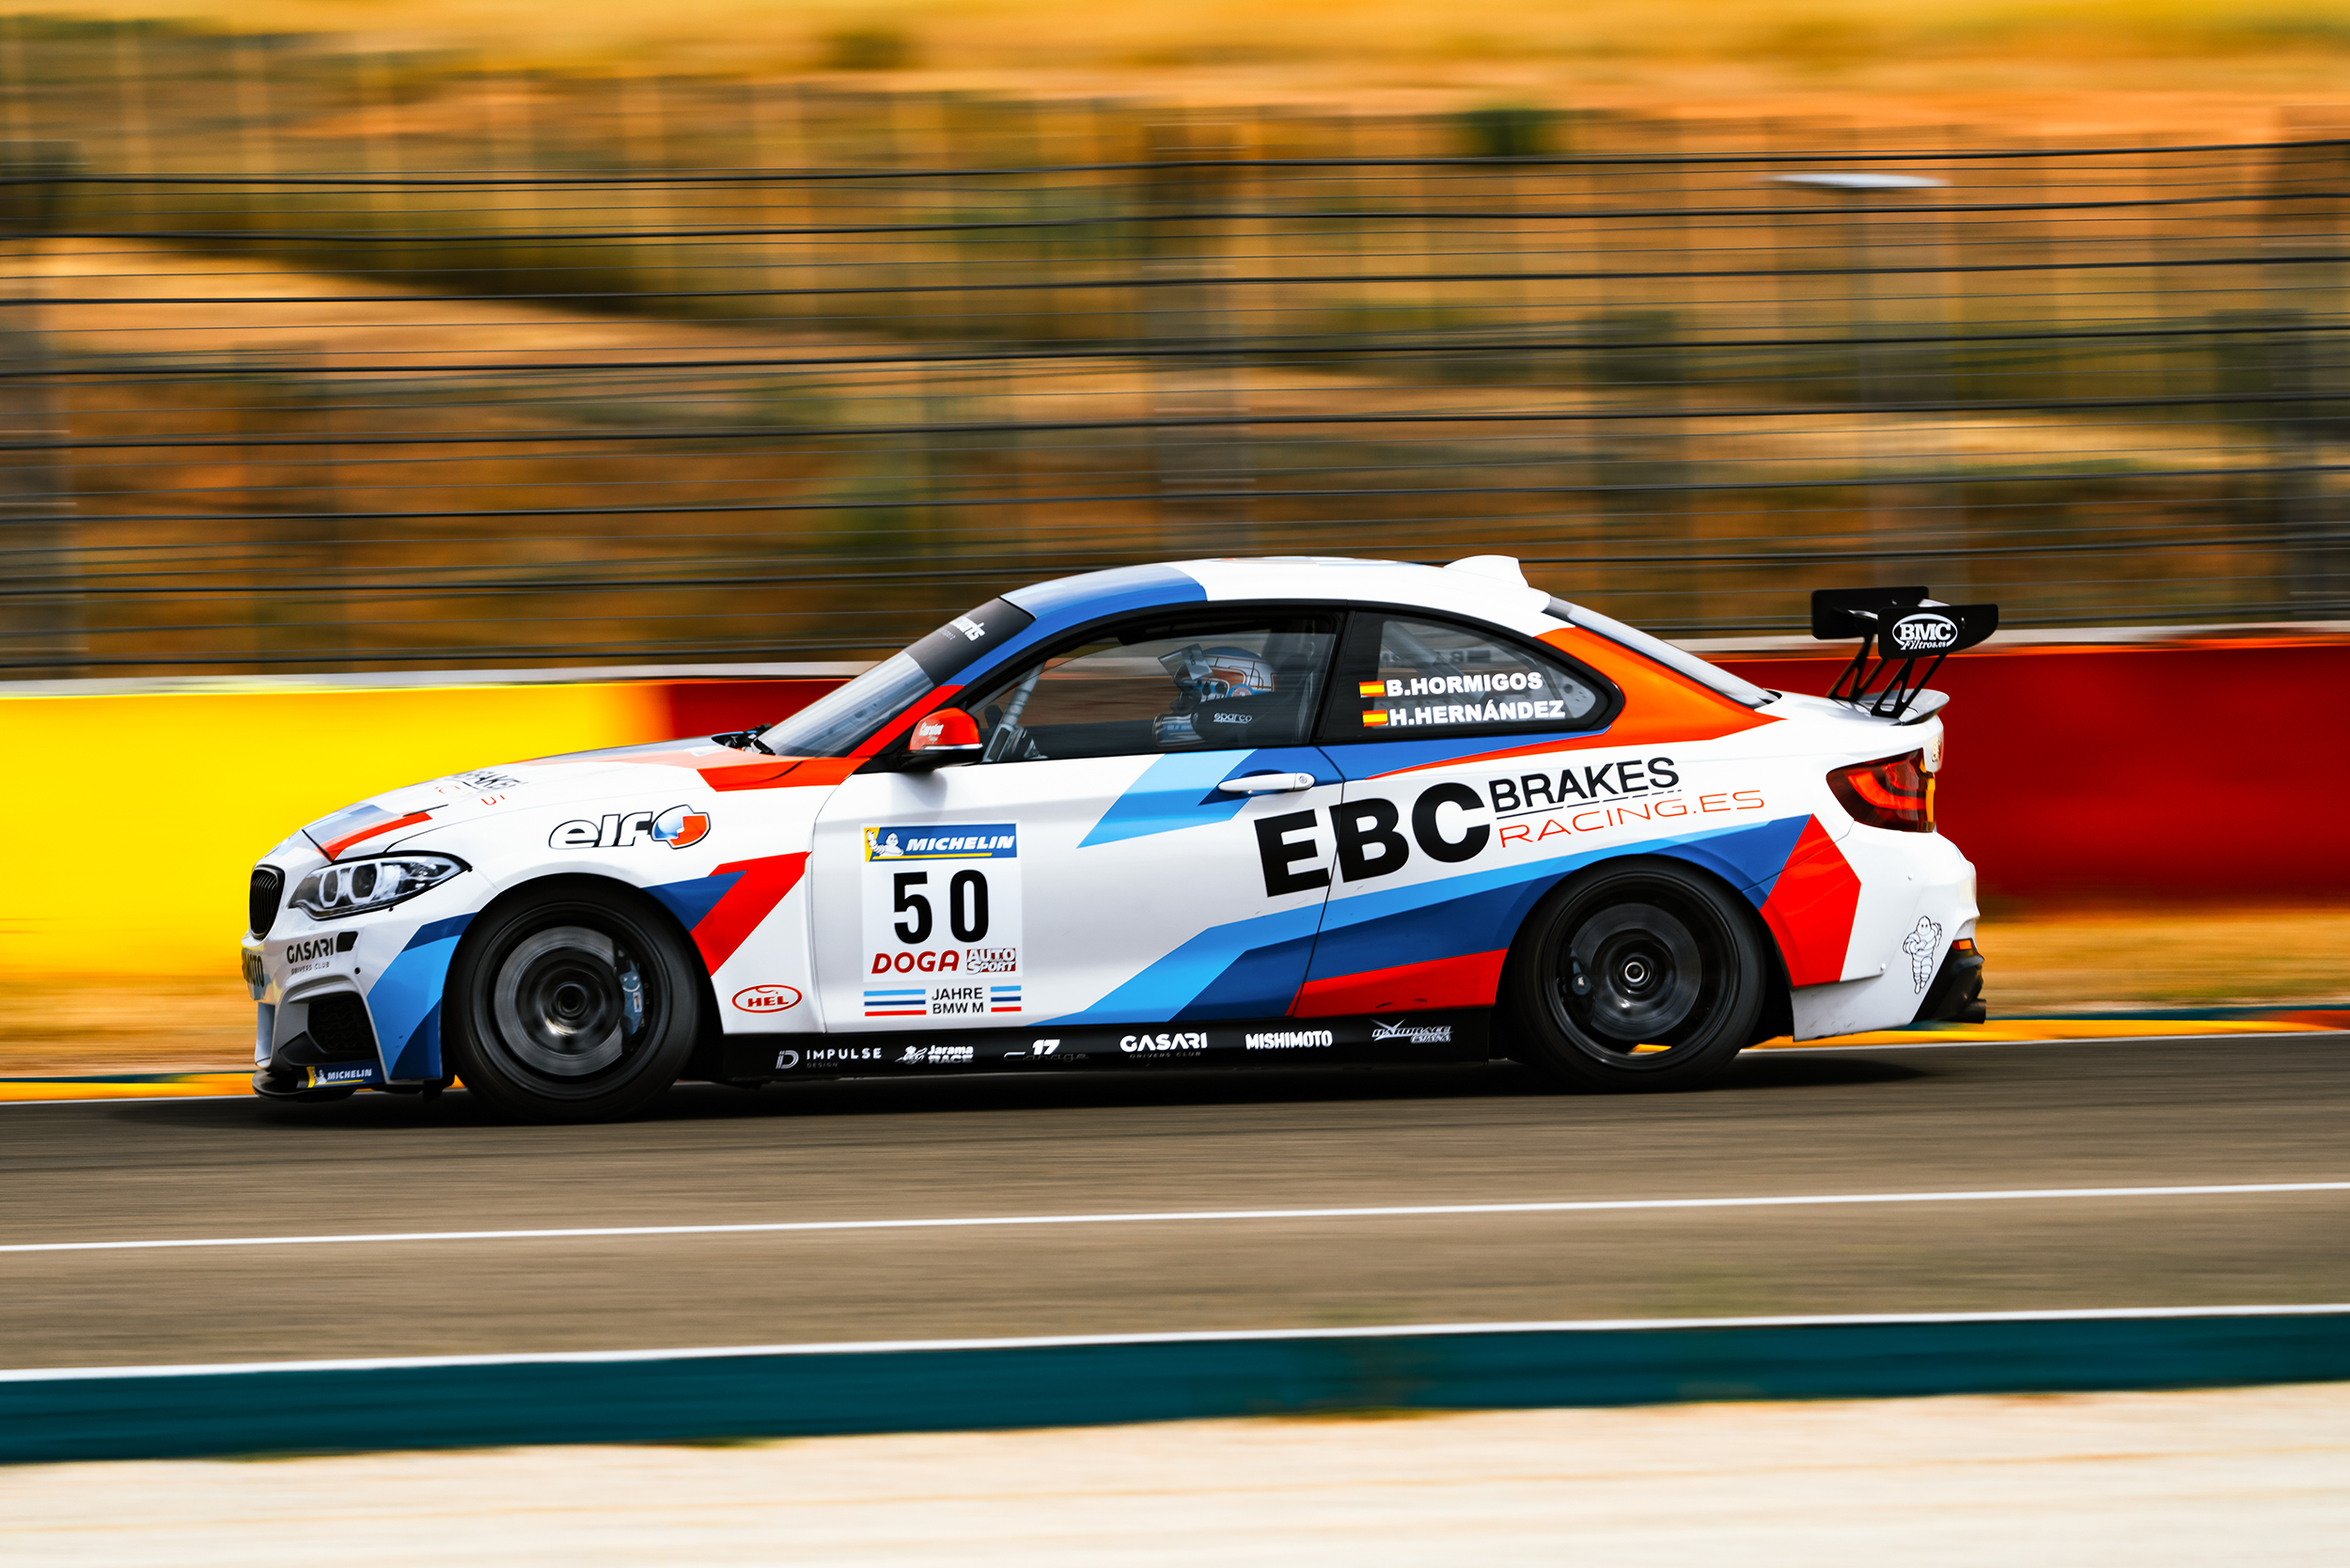 EBC RP-X™-Equipped Race Team Achieves Class Win in Latest Spanish Endurance Championship Round